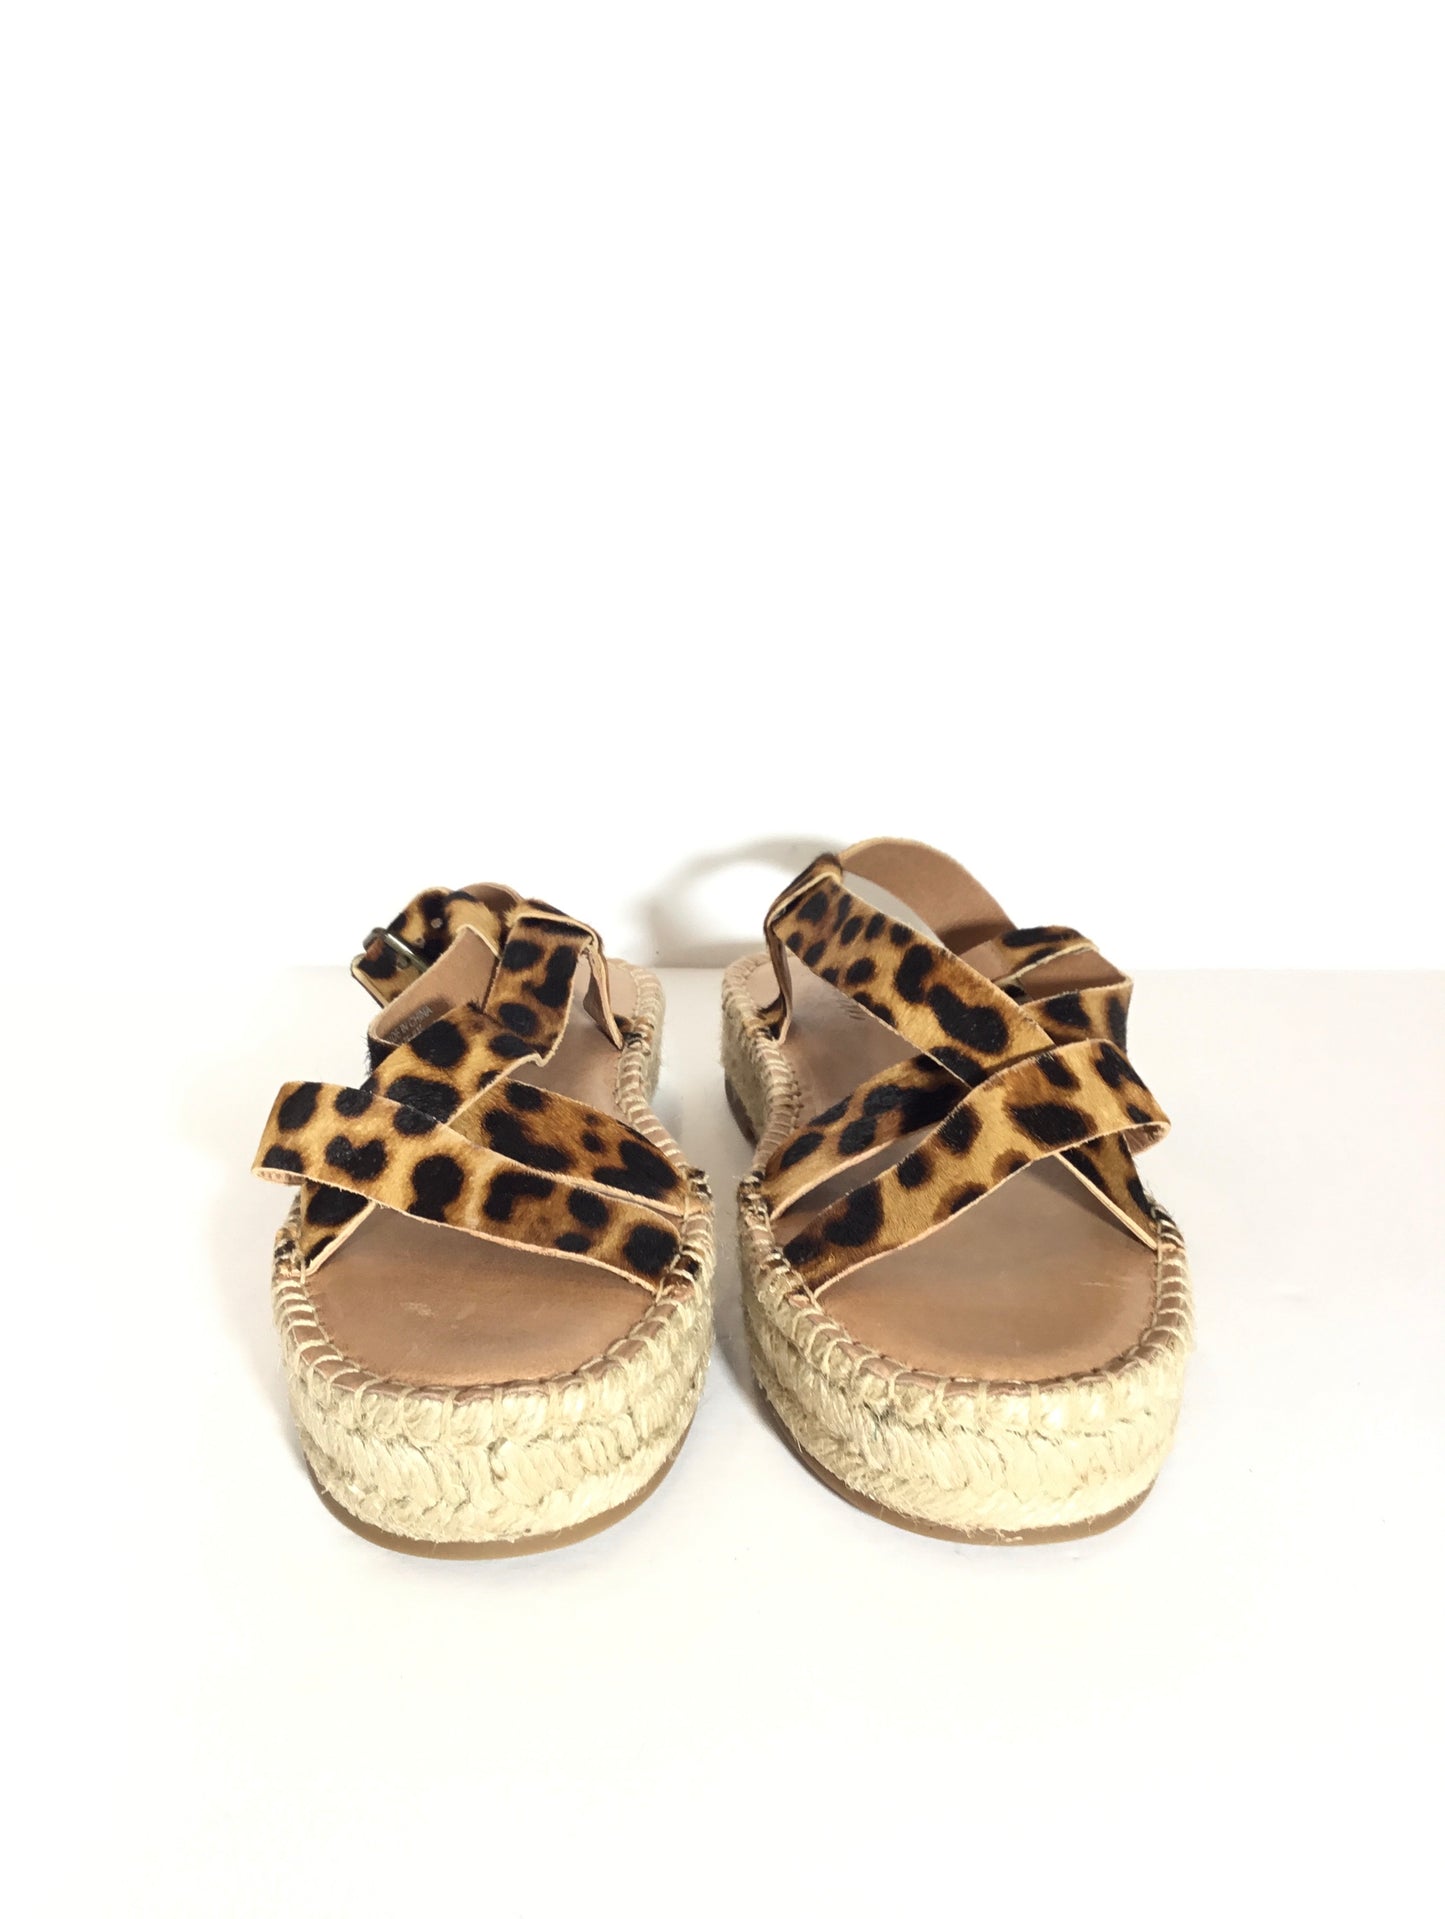 Sandals Flats By Madewell  Size: 8.5